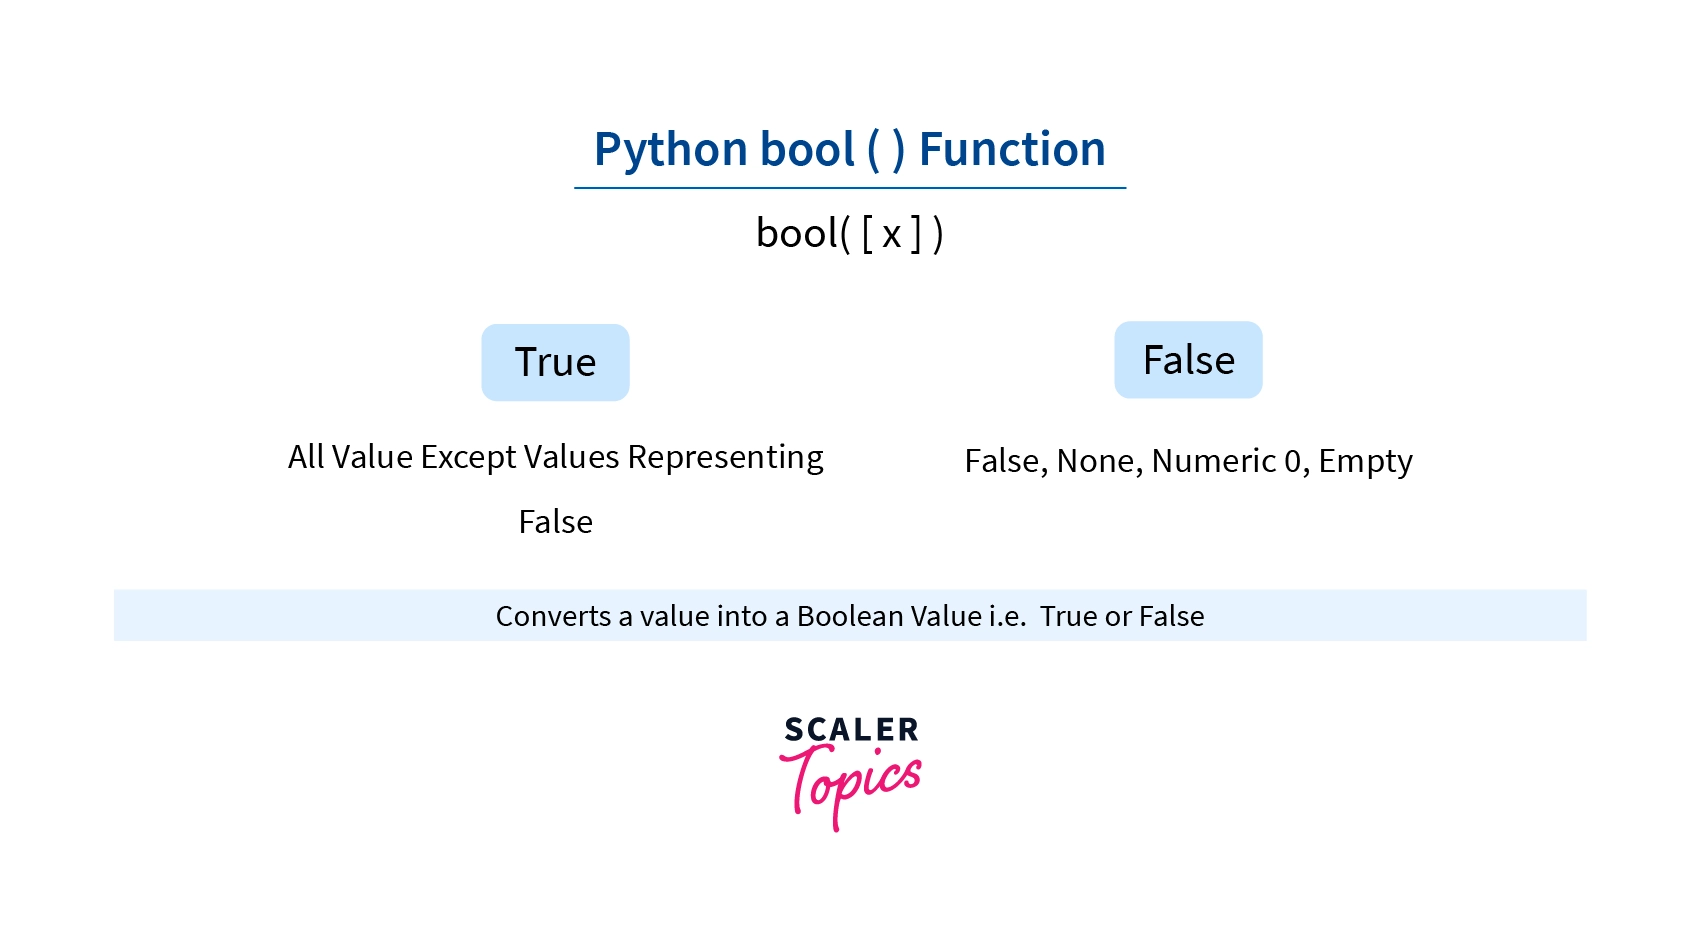 Return Values of bool() in Python